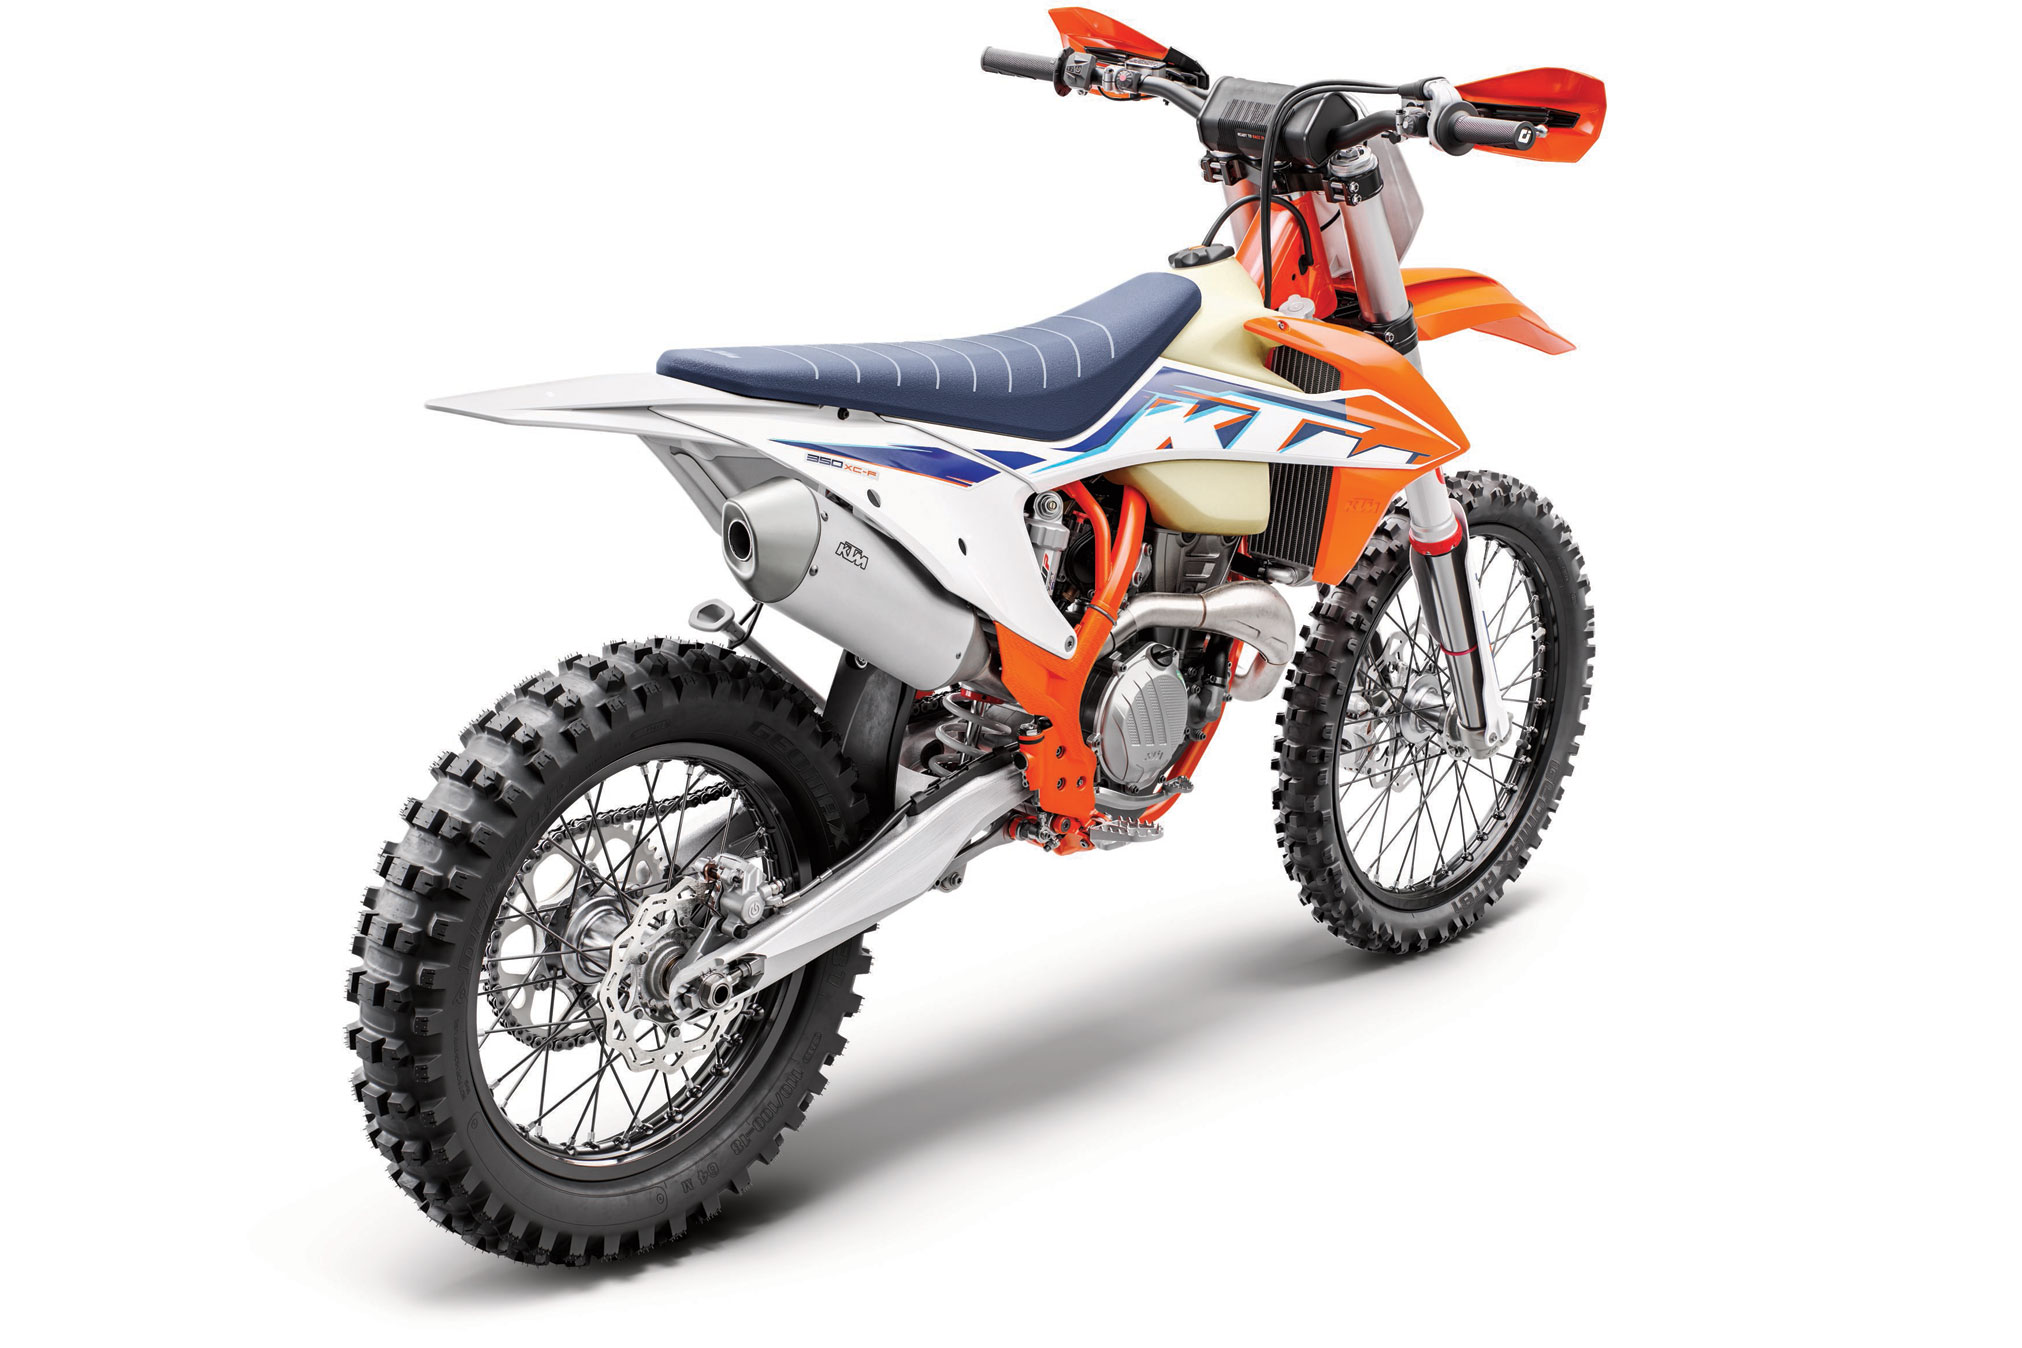 2022 KTM 350 XCF Guide • Total Motorcycle